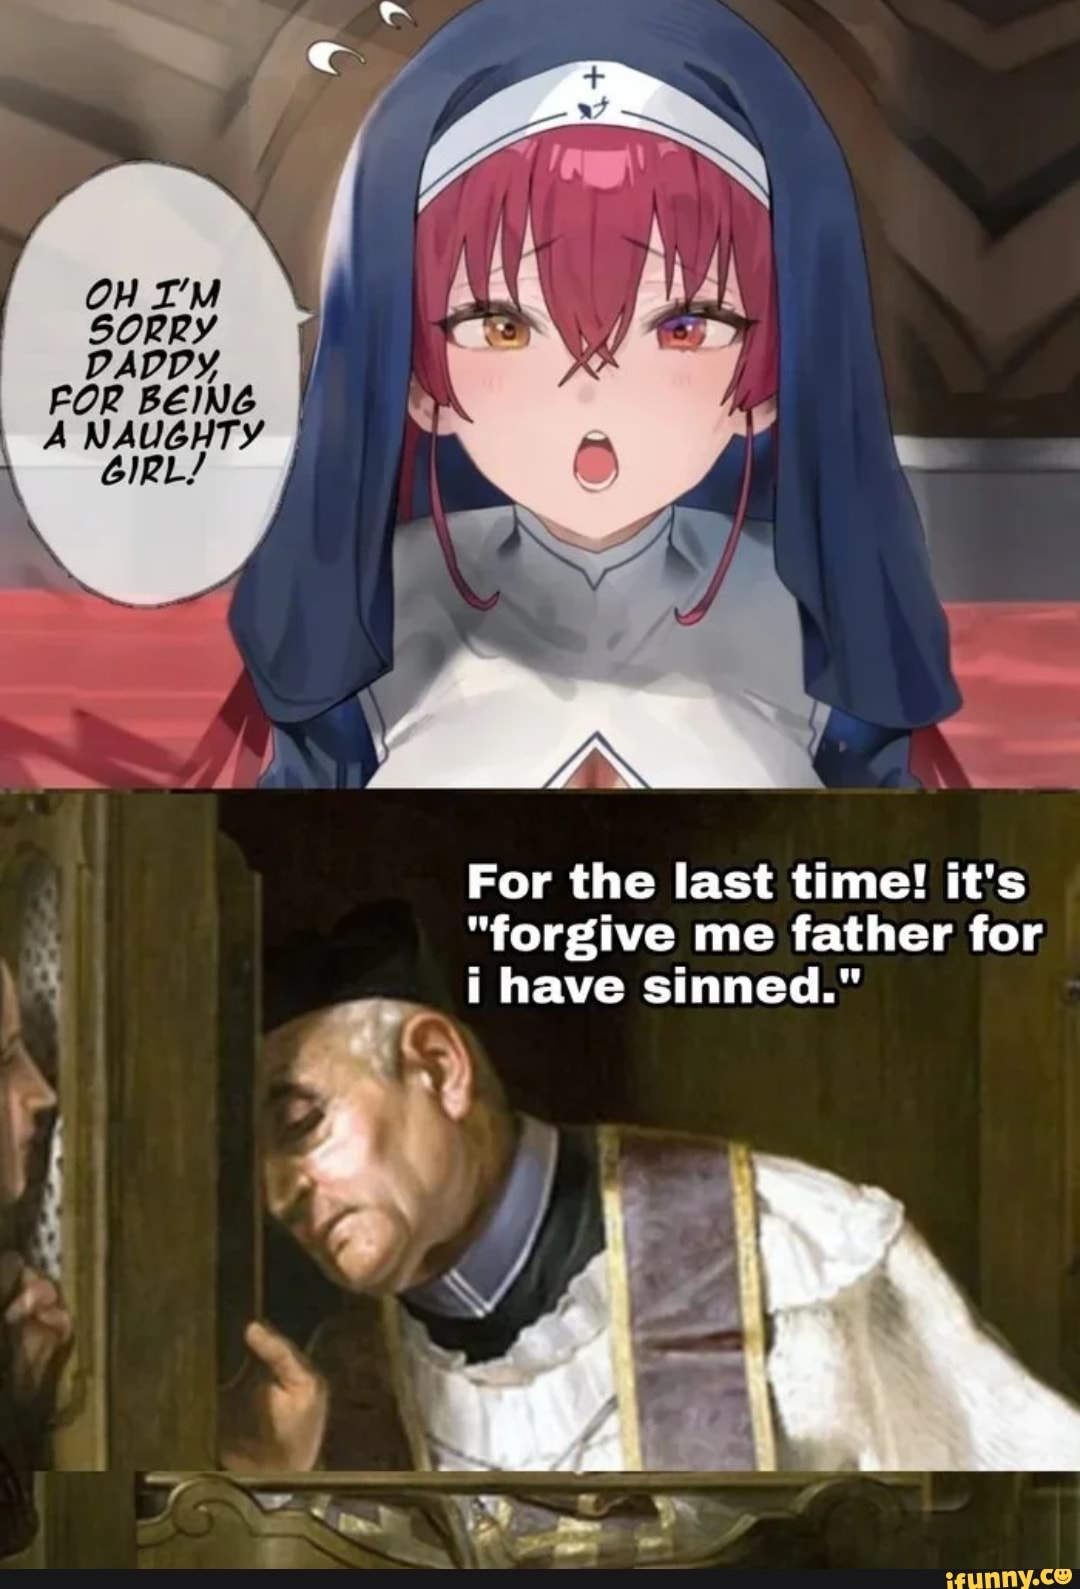 Daddy For Being A Naughty Girl For The Last Time It S Forgive Me Father For I Have Sinned Ne